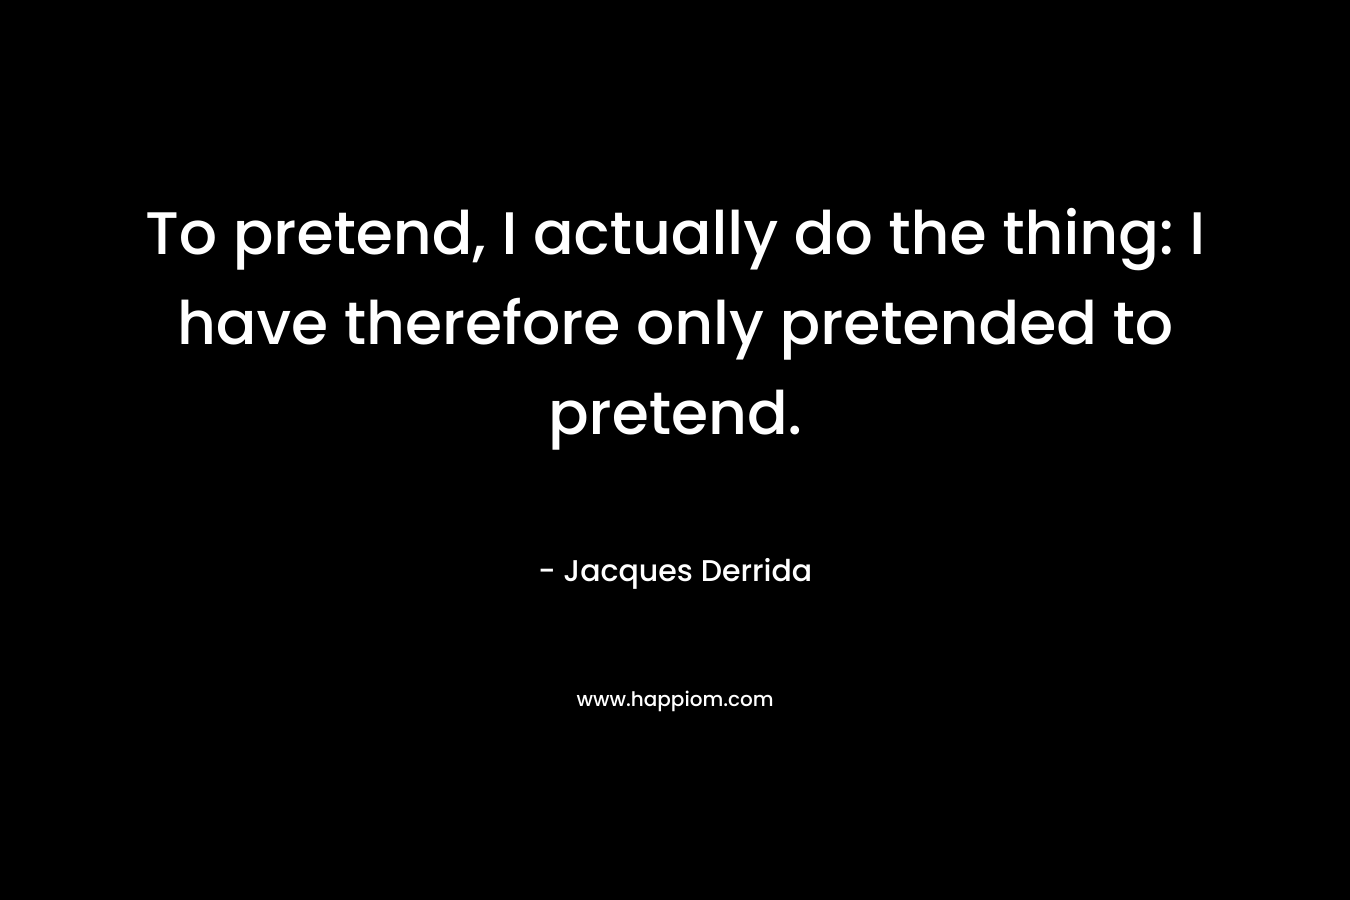 To pretend, I actually do the thing: I have therefore only pretended to pretend.